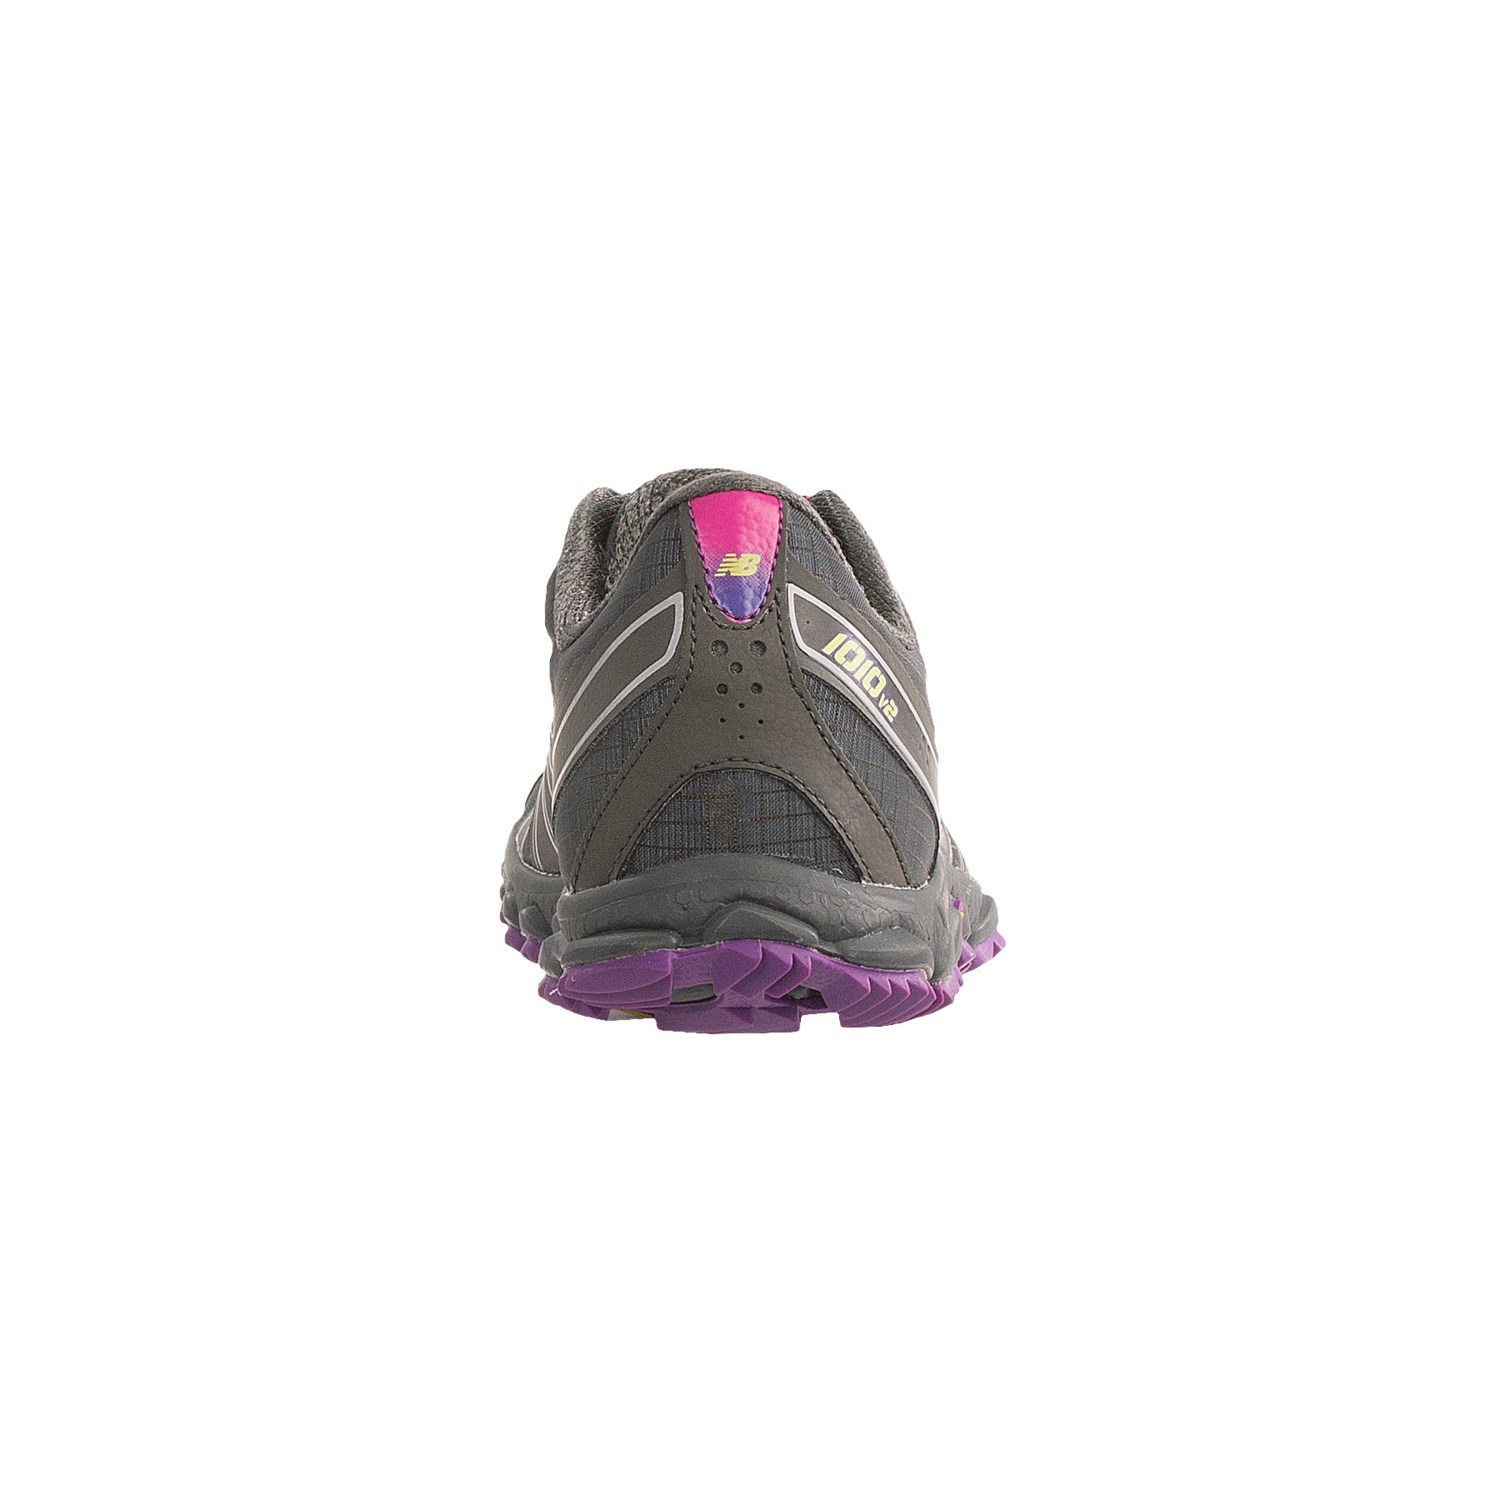 New Balance Minimus 1010v2 Trail Running Shoes (For Women) 7521G - Save 49%